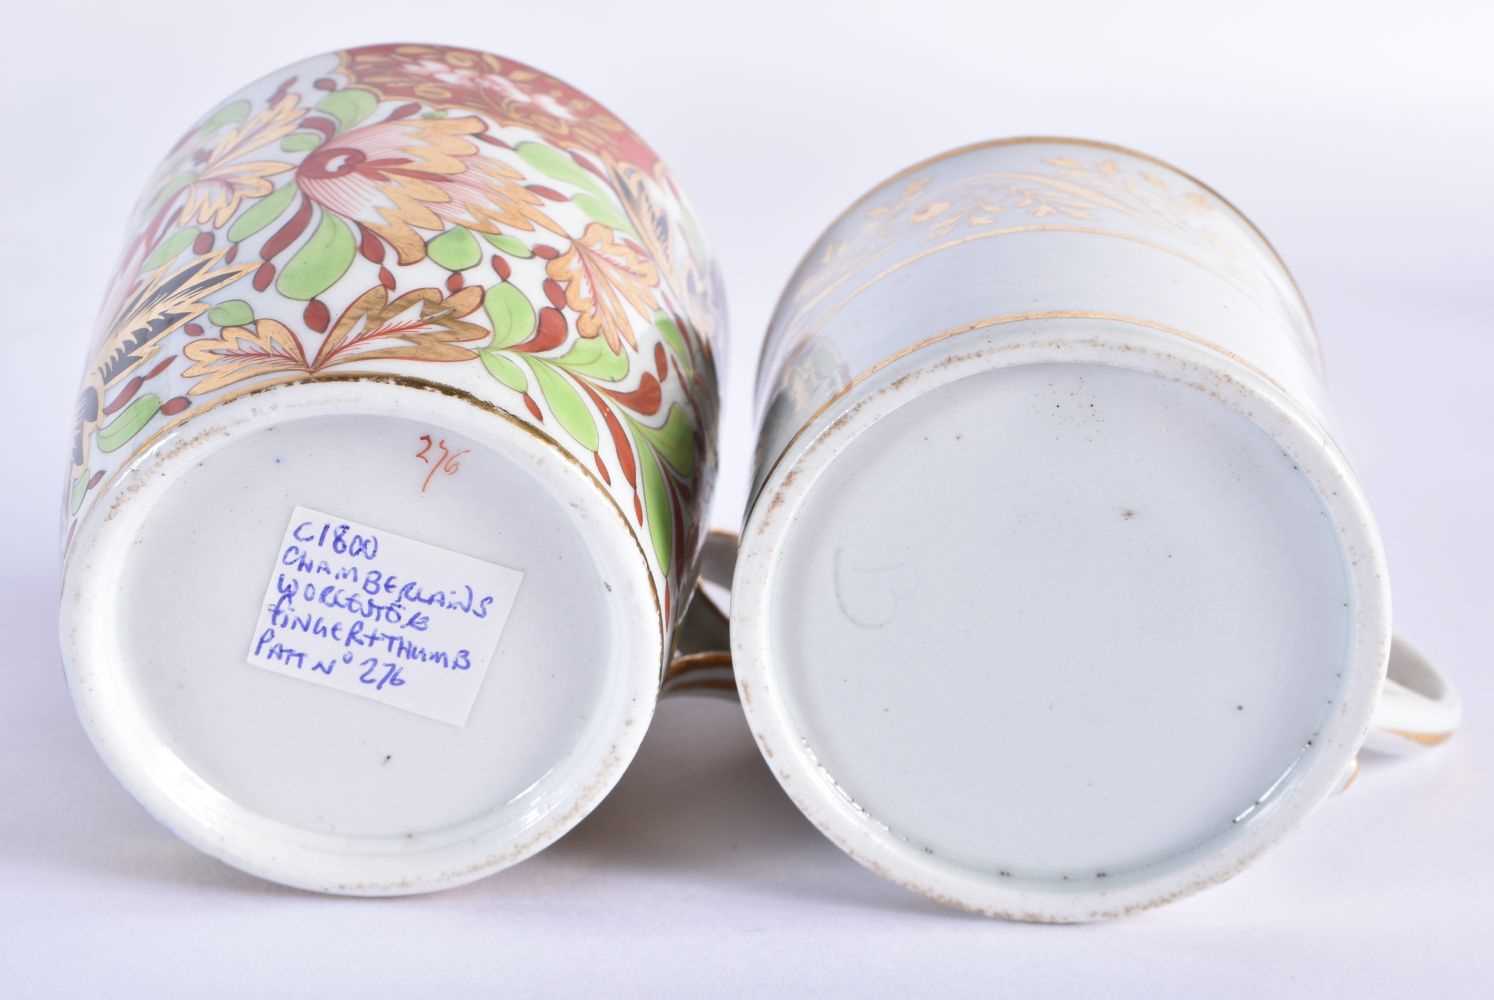 Chamberlain coffee can with Finger and Thumb pattern, Barr Flight and Barr coffee printed with rural - Image 7 of 10